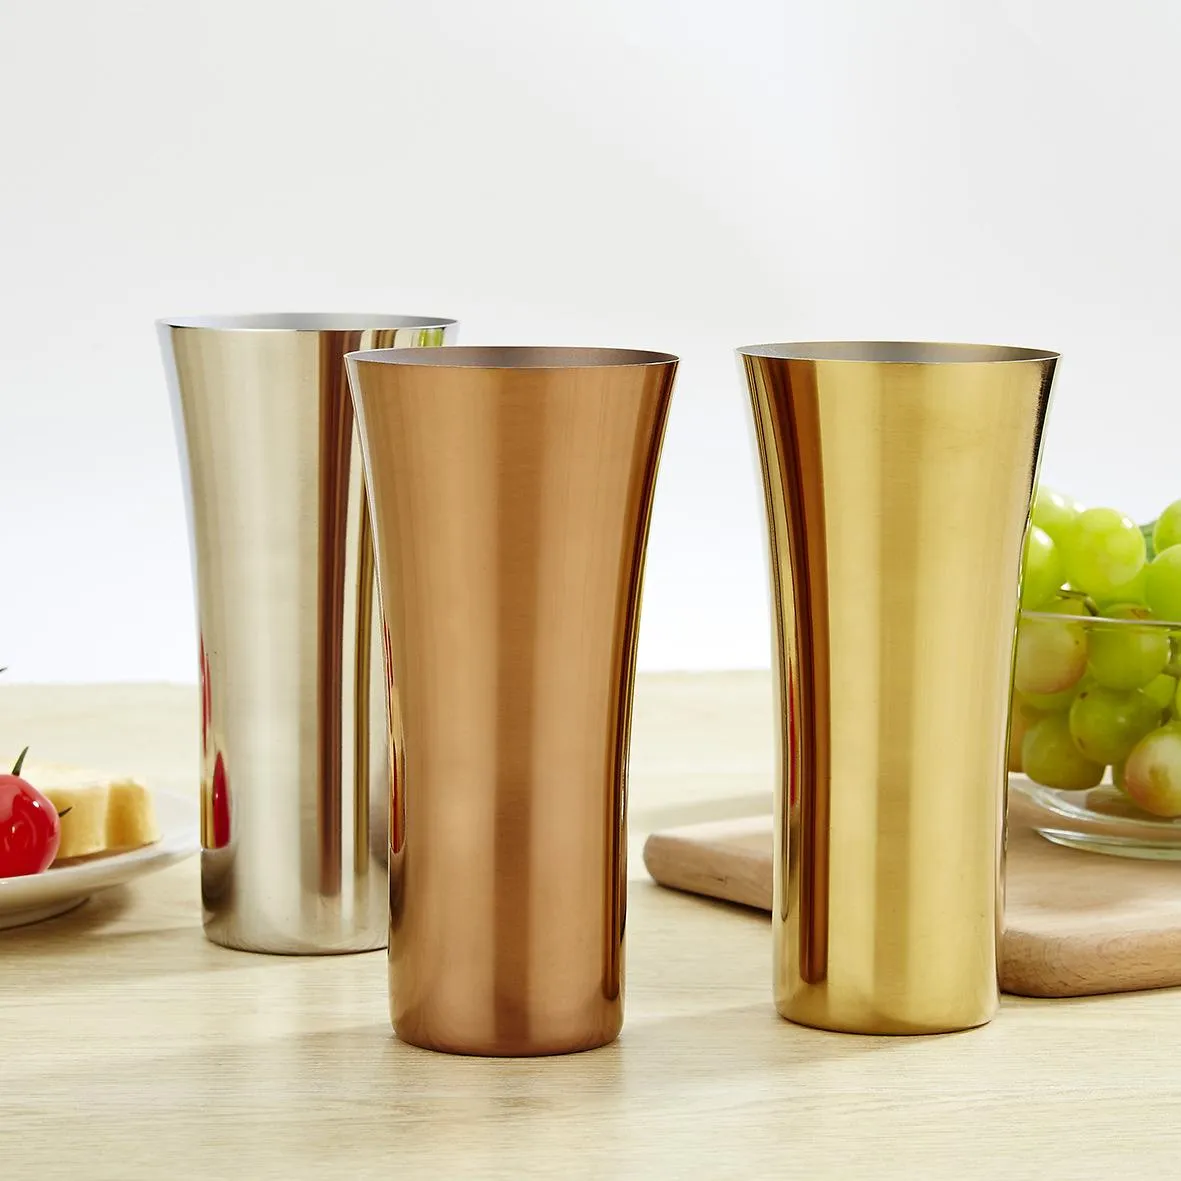 400ml Beer Cup 304 Stainless Steel Vase Shape Cold Drink Juice Mojito Mug Milk Drinkwares Home Kitchen Supply Gold/Silver